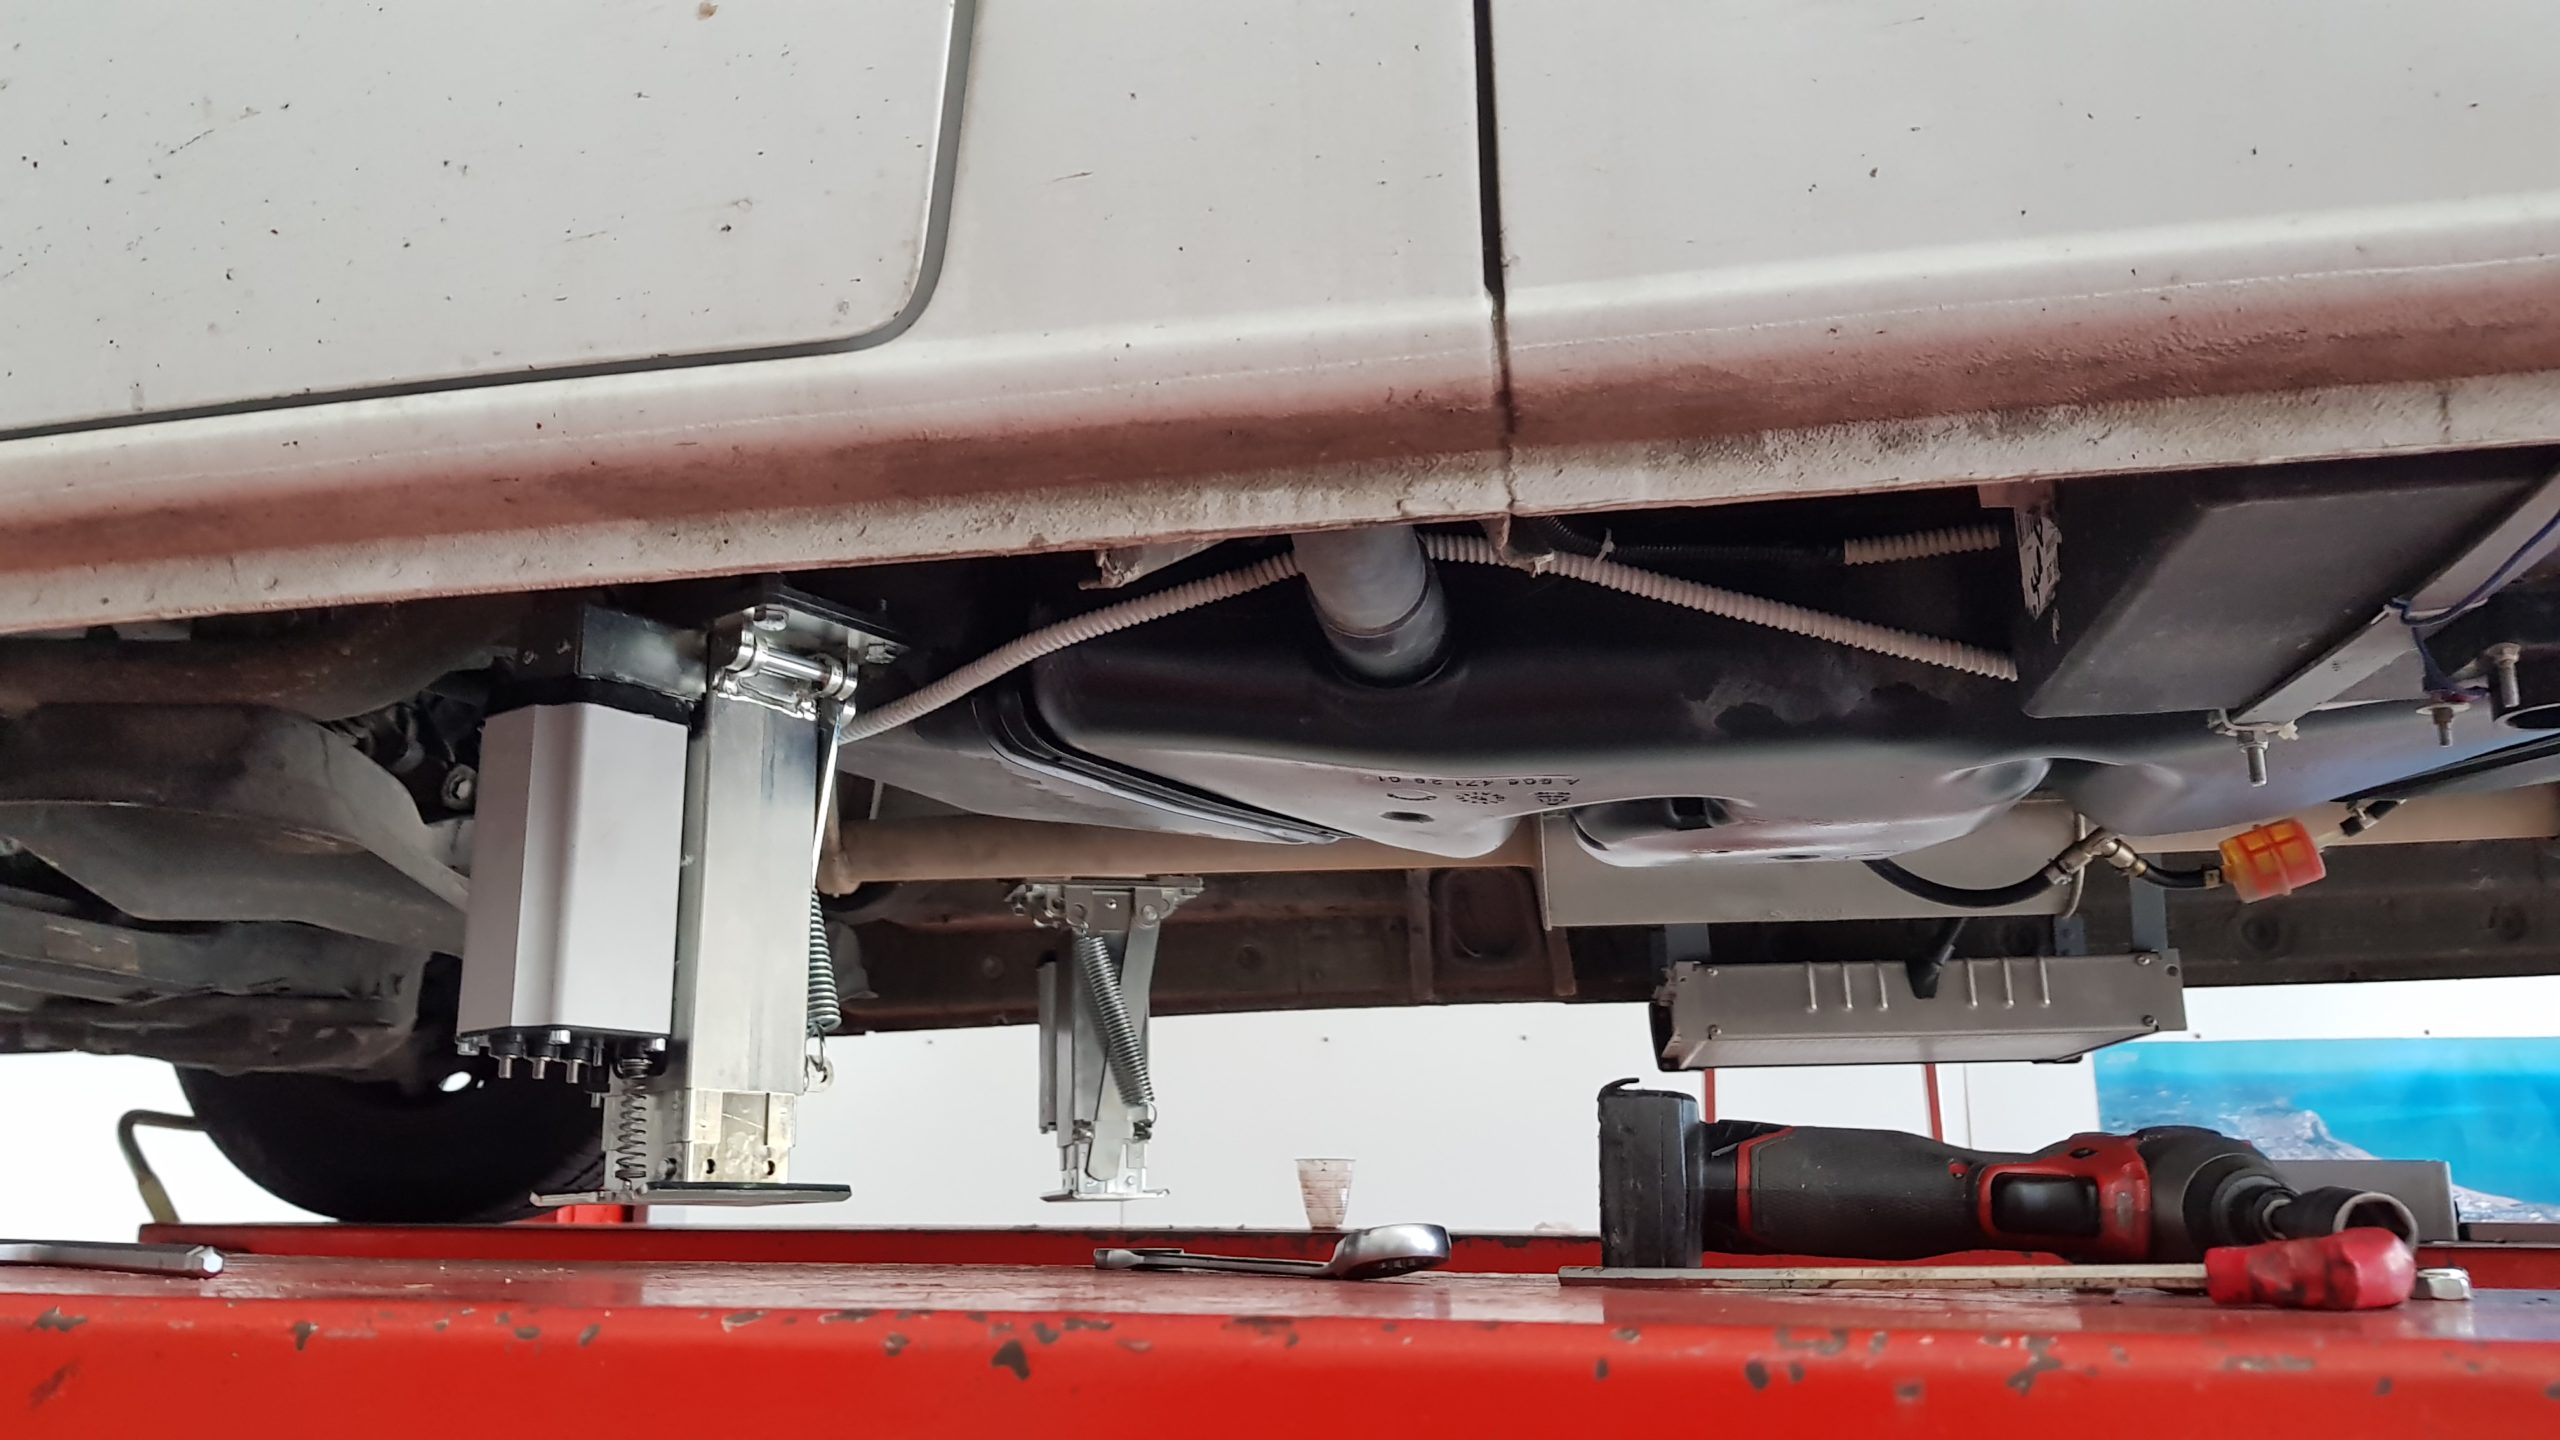 Redfoot Levelling - The underside of a car with a tire under it and the Redfoot Levelling Mercedes Benz 'AutoLift' system.